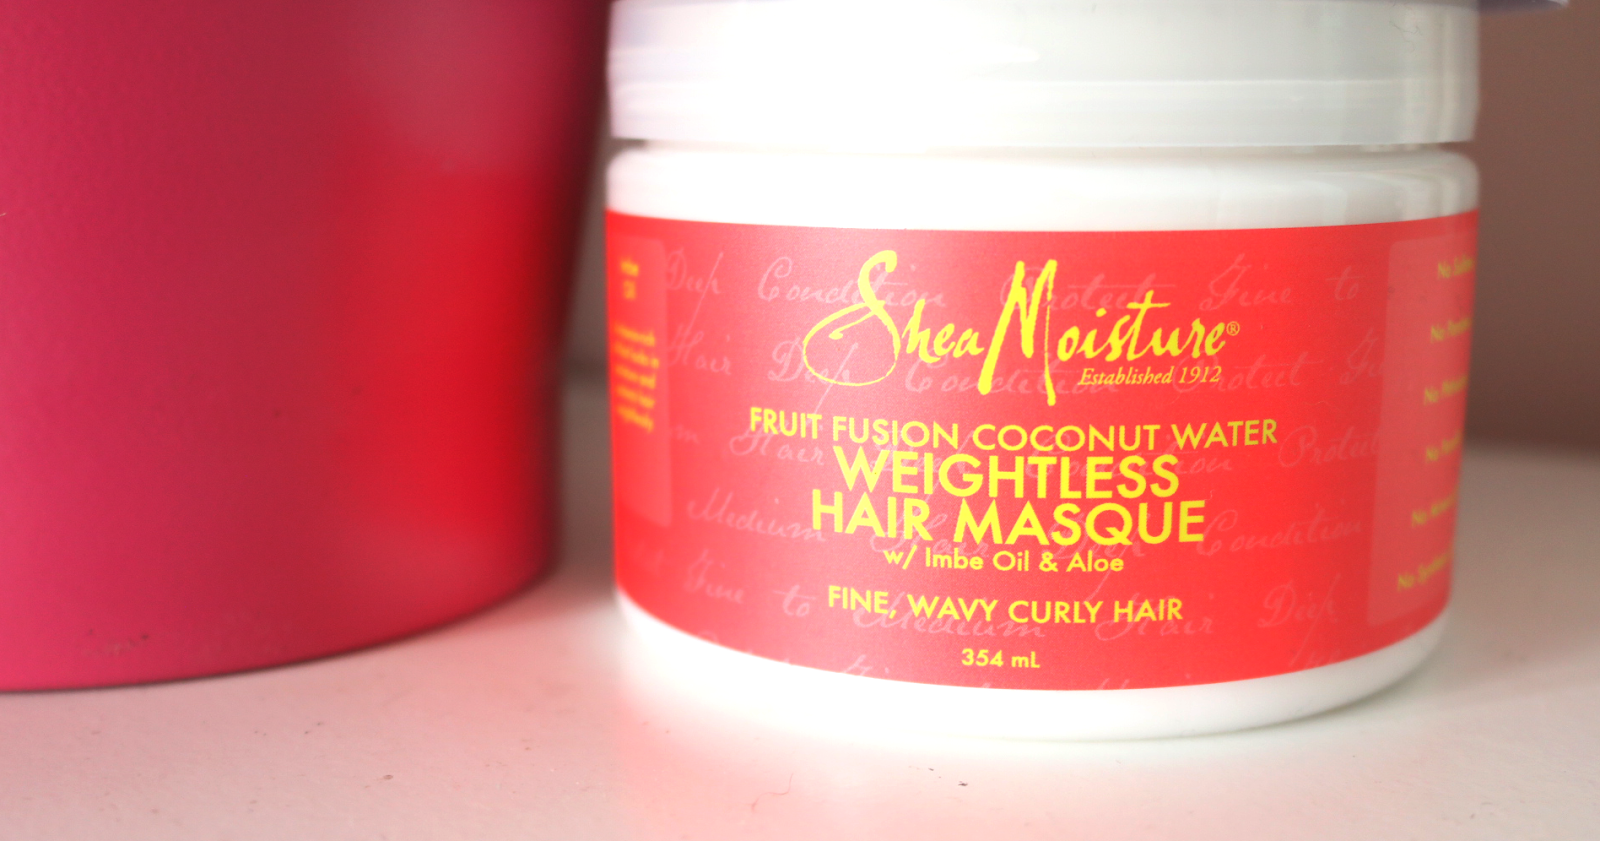 SheaMoisture Fruit Fusion Coconut Water Weightless Hair Masque